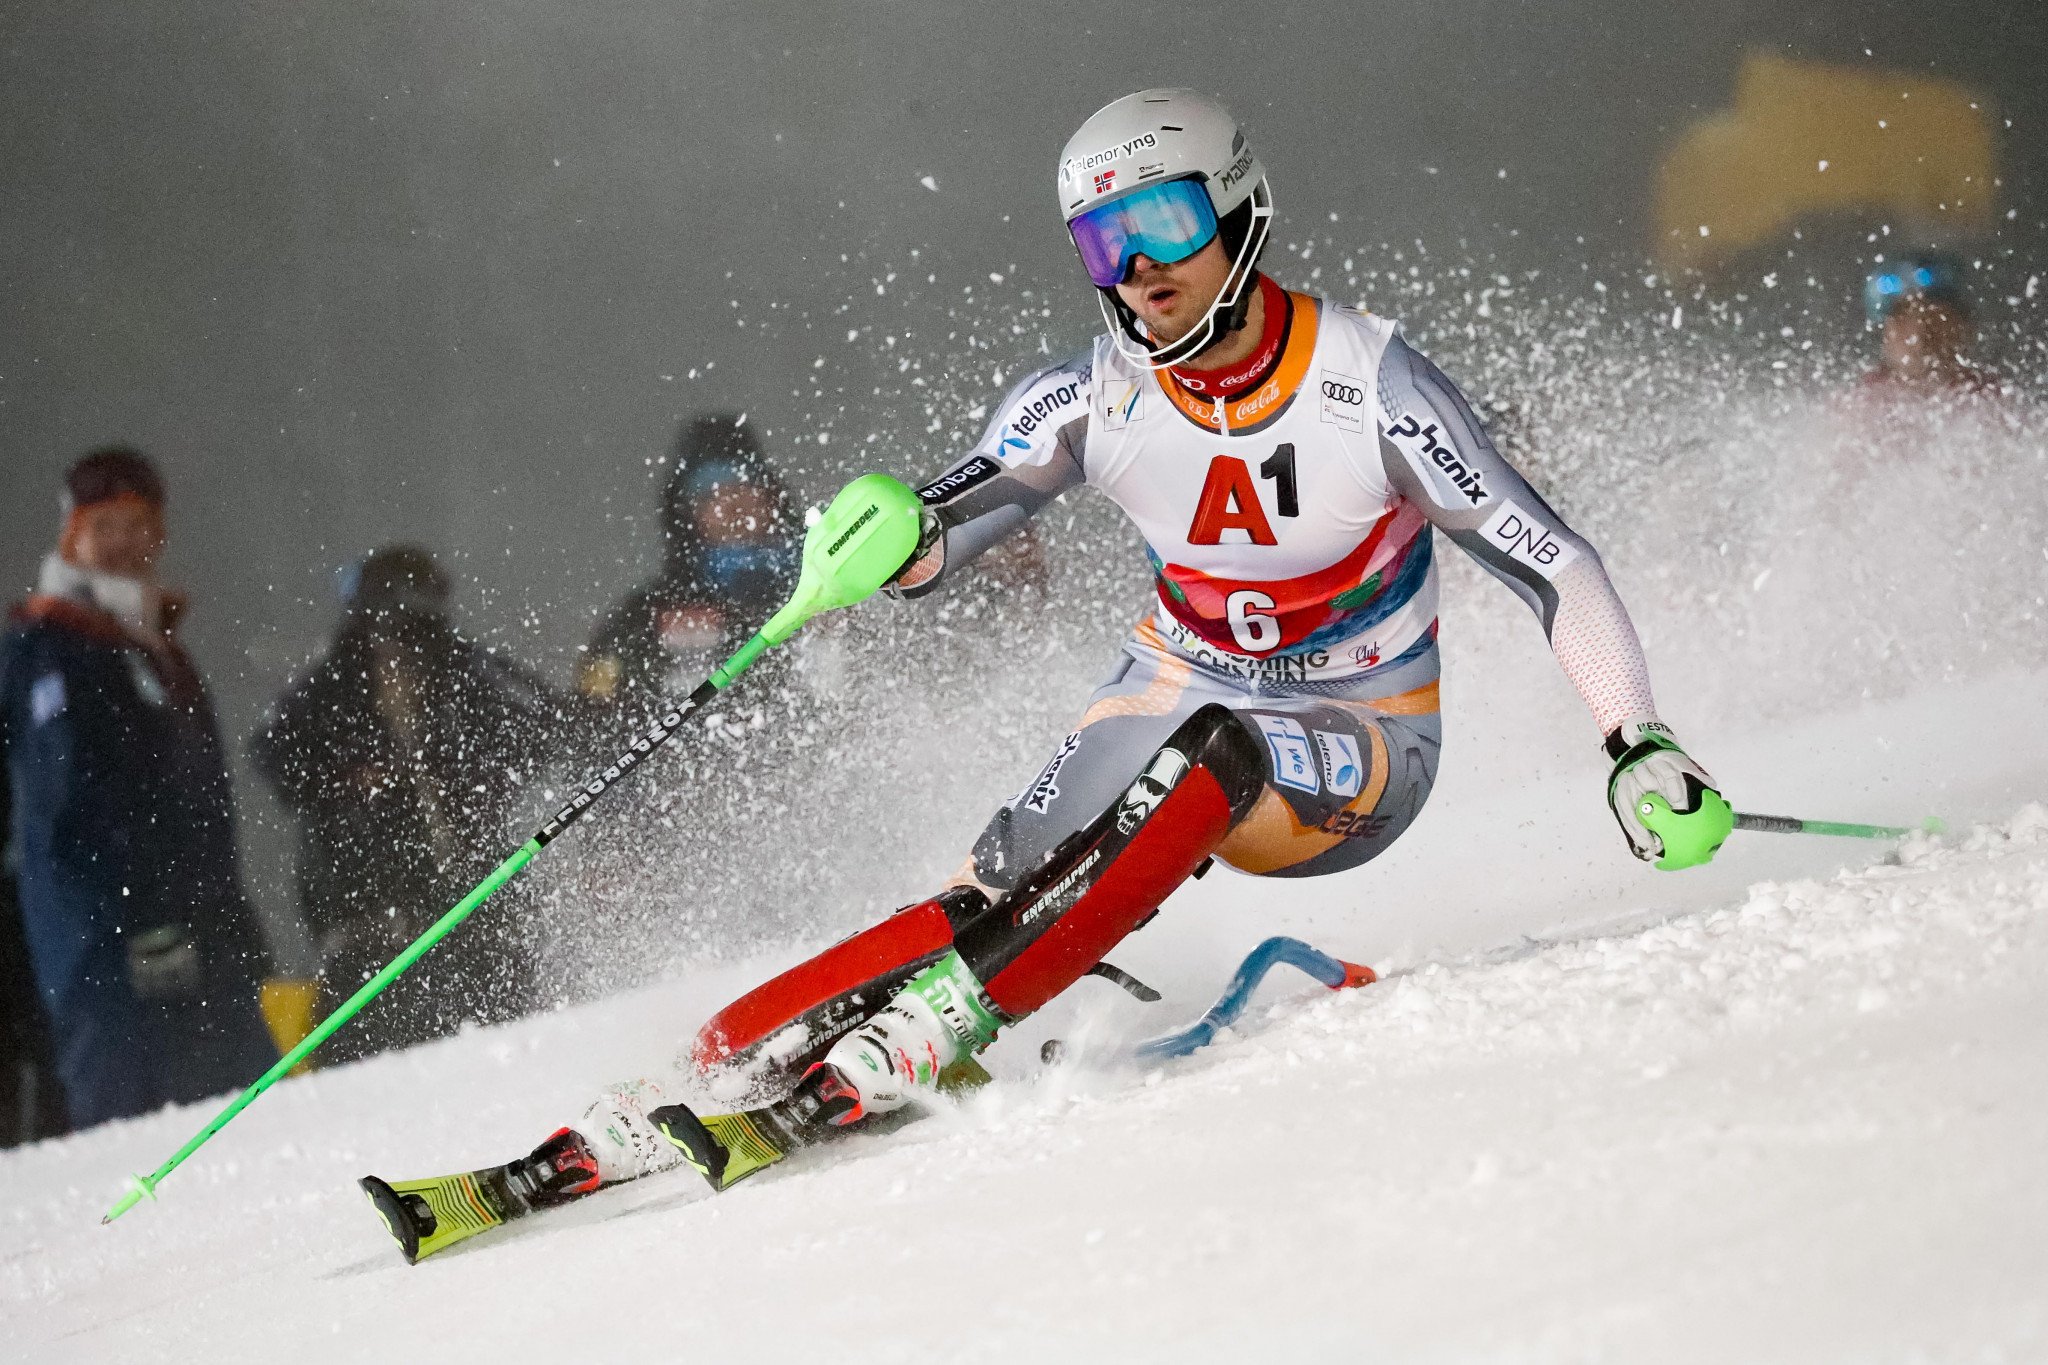 Frenchman Noël takes home slalom victory at FIS Alpine Ski World Cup